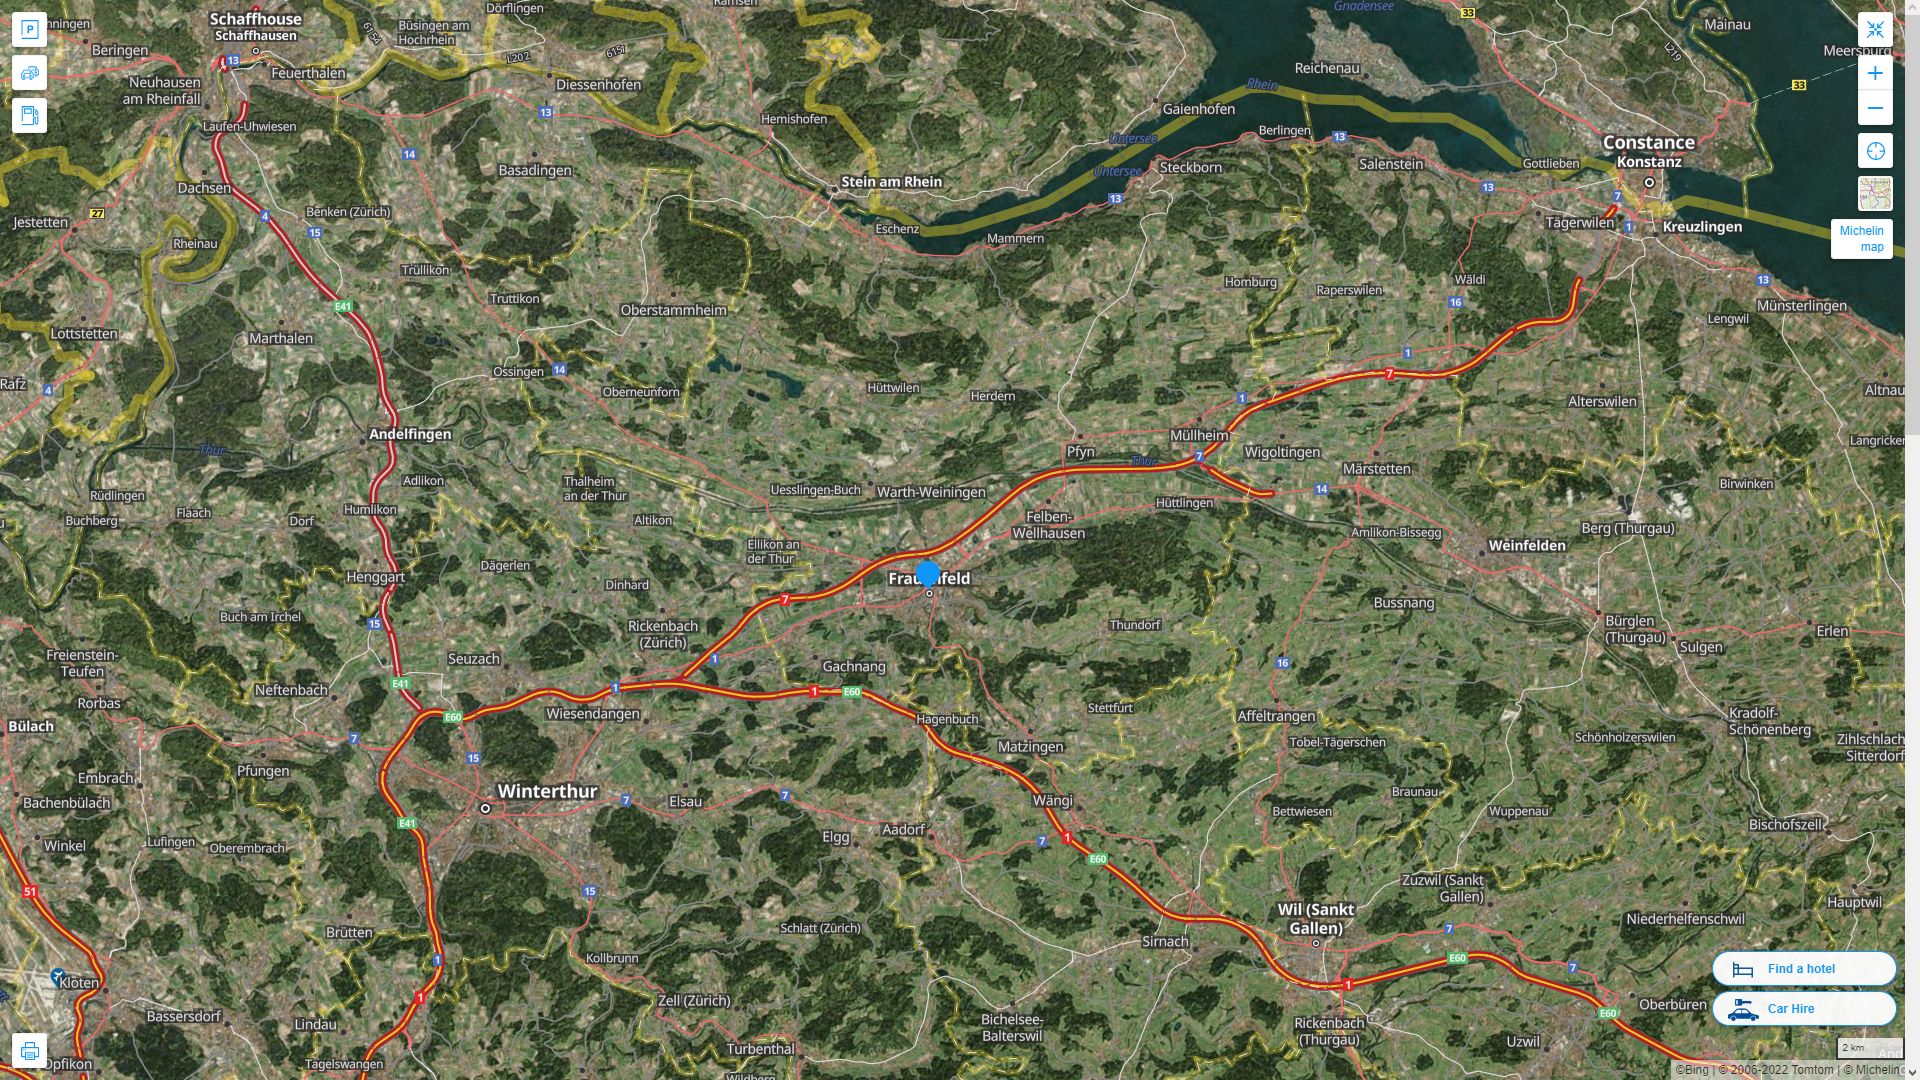 Frauenfeld Highway and Road Map with Satellite View